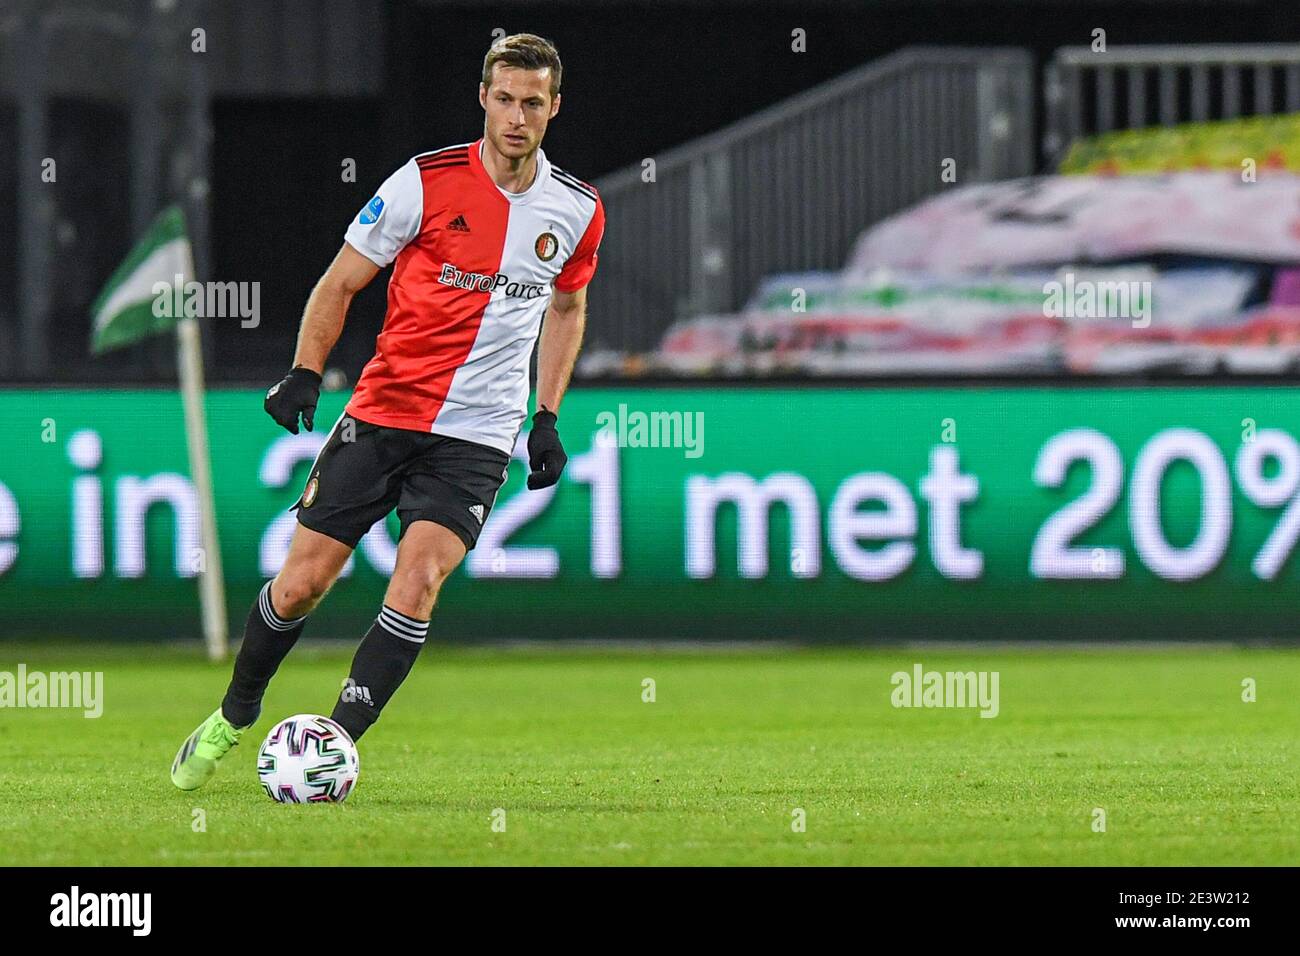 ROTTERDAM, NETHERLANDS - 20: Uros Spajic of Feyenoord during the Dutch KNVB Cup match between Feyenoord and Heracles Almelo at De Kuip on Janu Stock Photo - Alamy